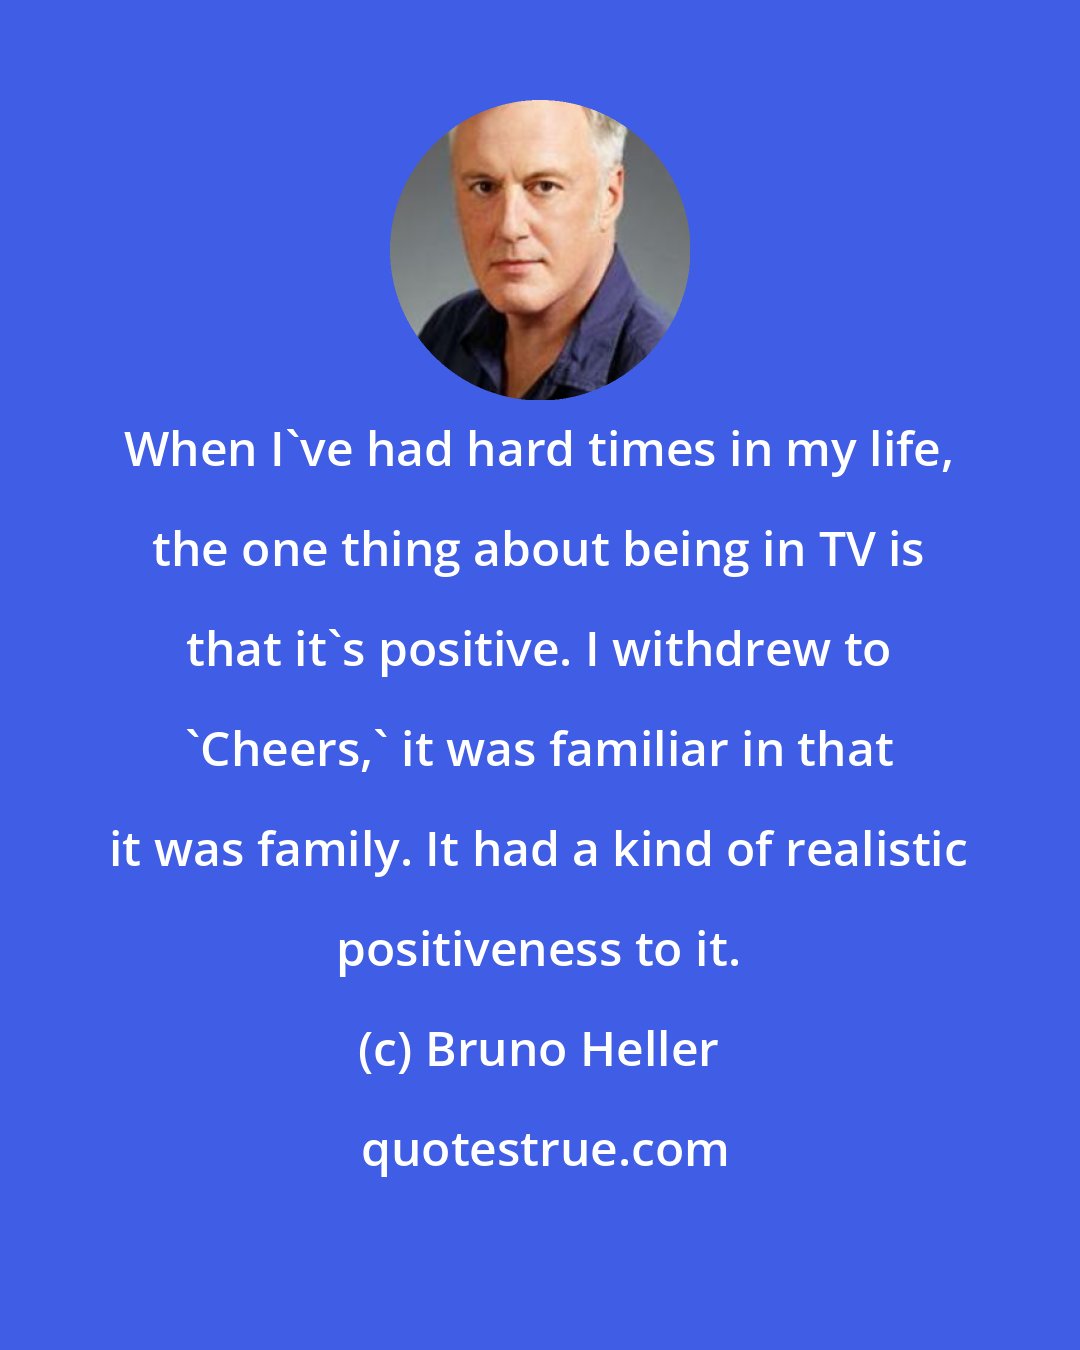 Bruno Heller: When I've had hard times in my life, the one thing about being in TV is that it's positive. I withdrew to 'Cheers,' it was familiar in that it was family. It had a kind of realistic positiveness to it.